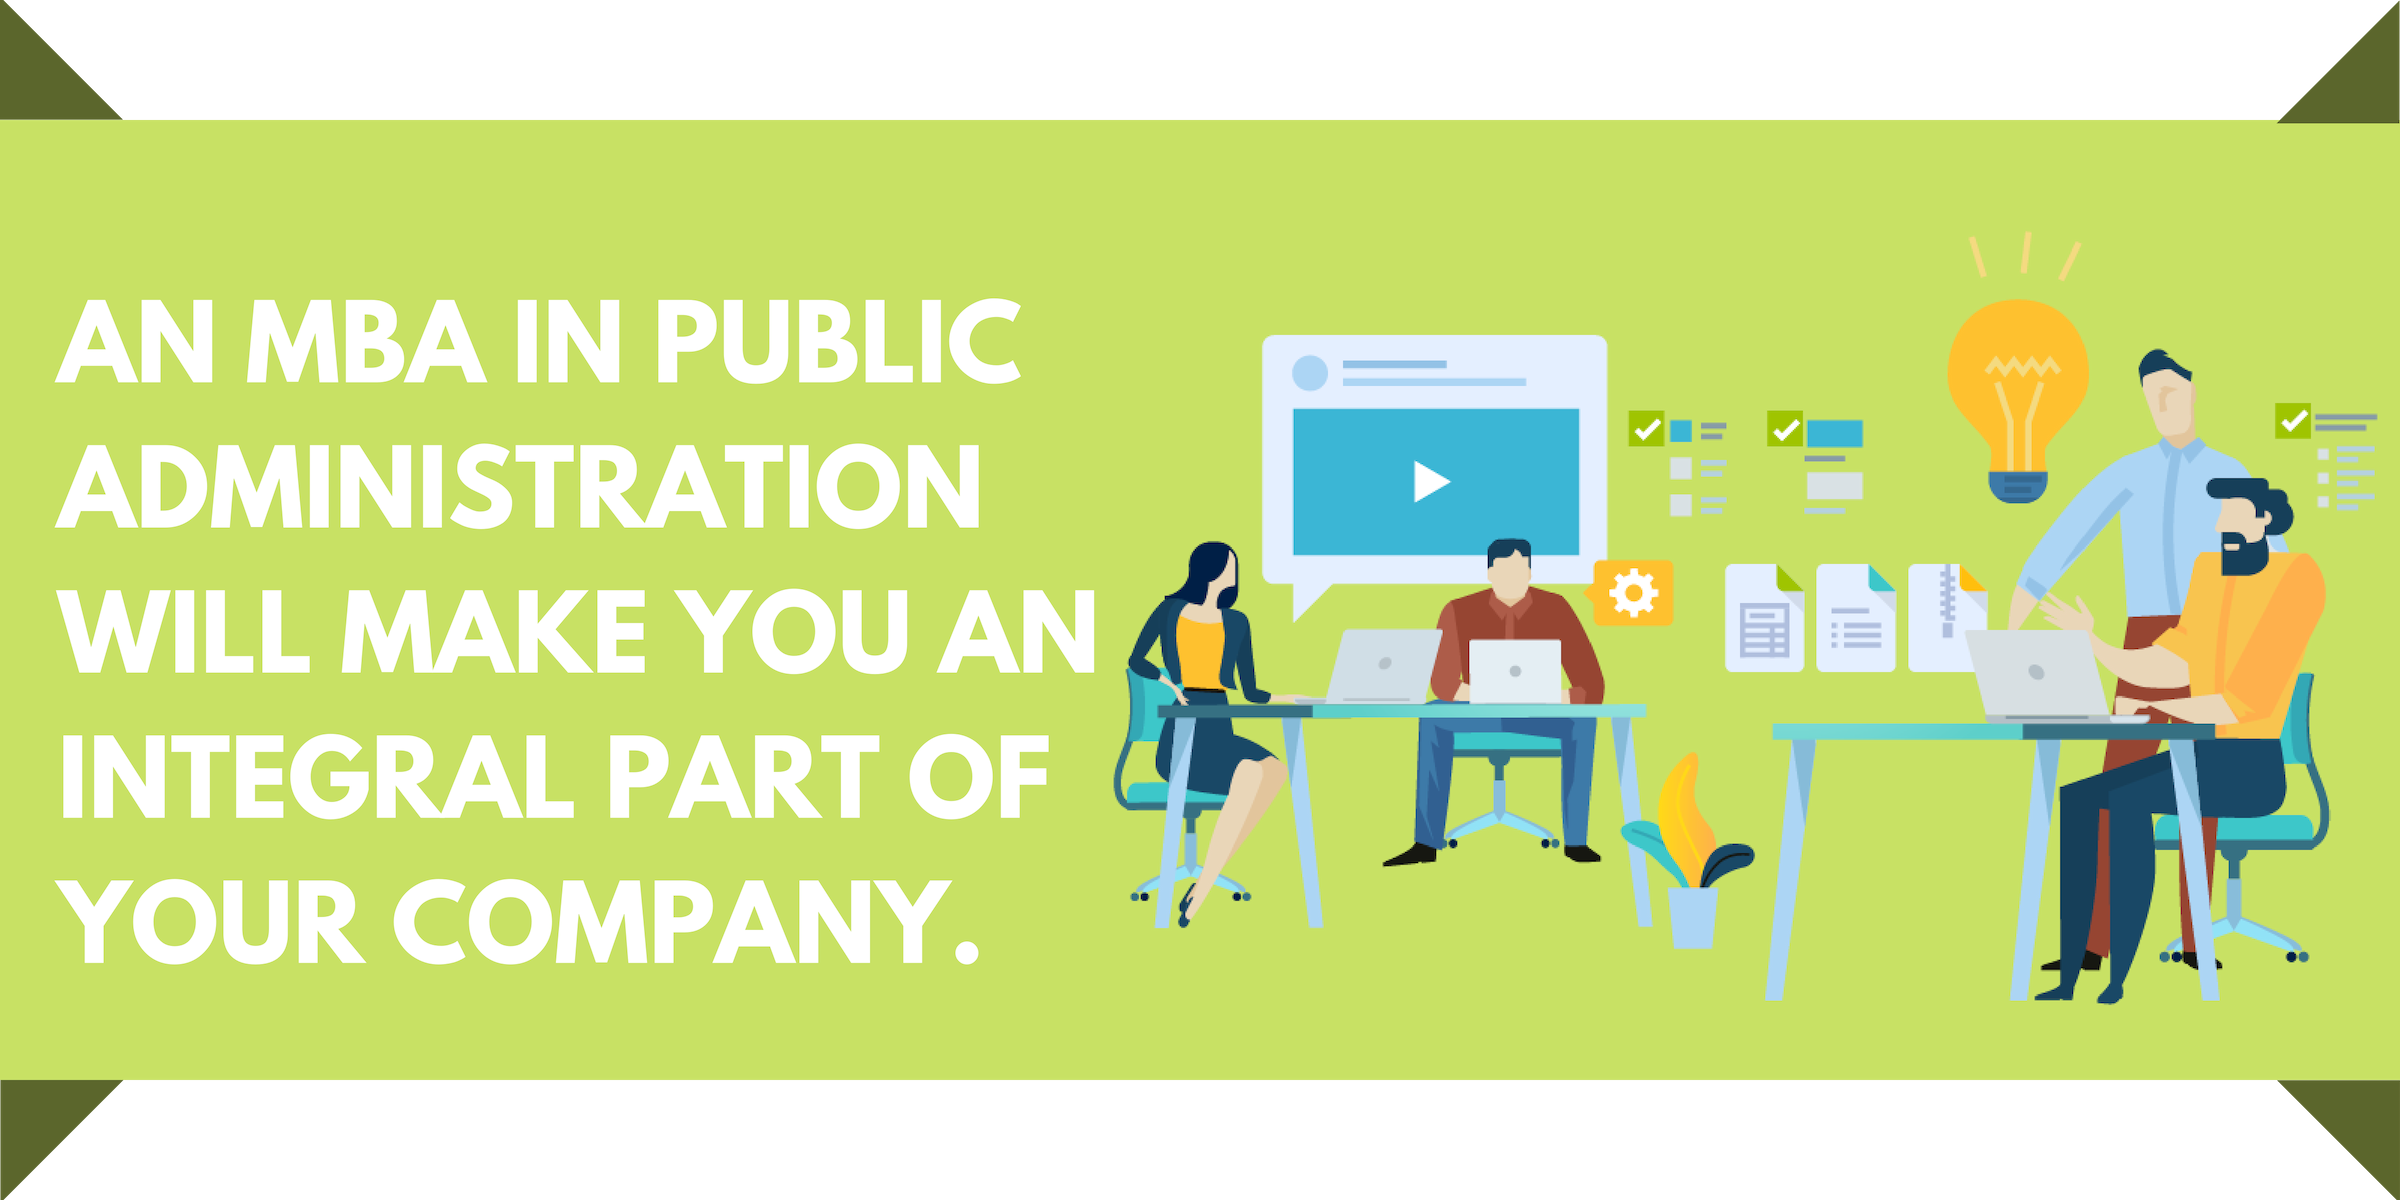 An MBA in public administration will make you an integral part of your company.